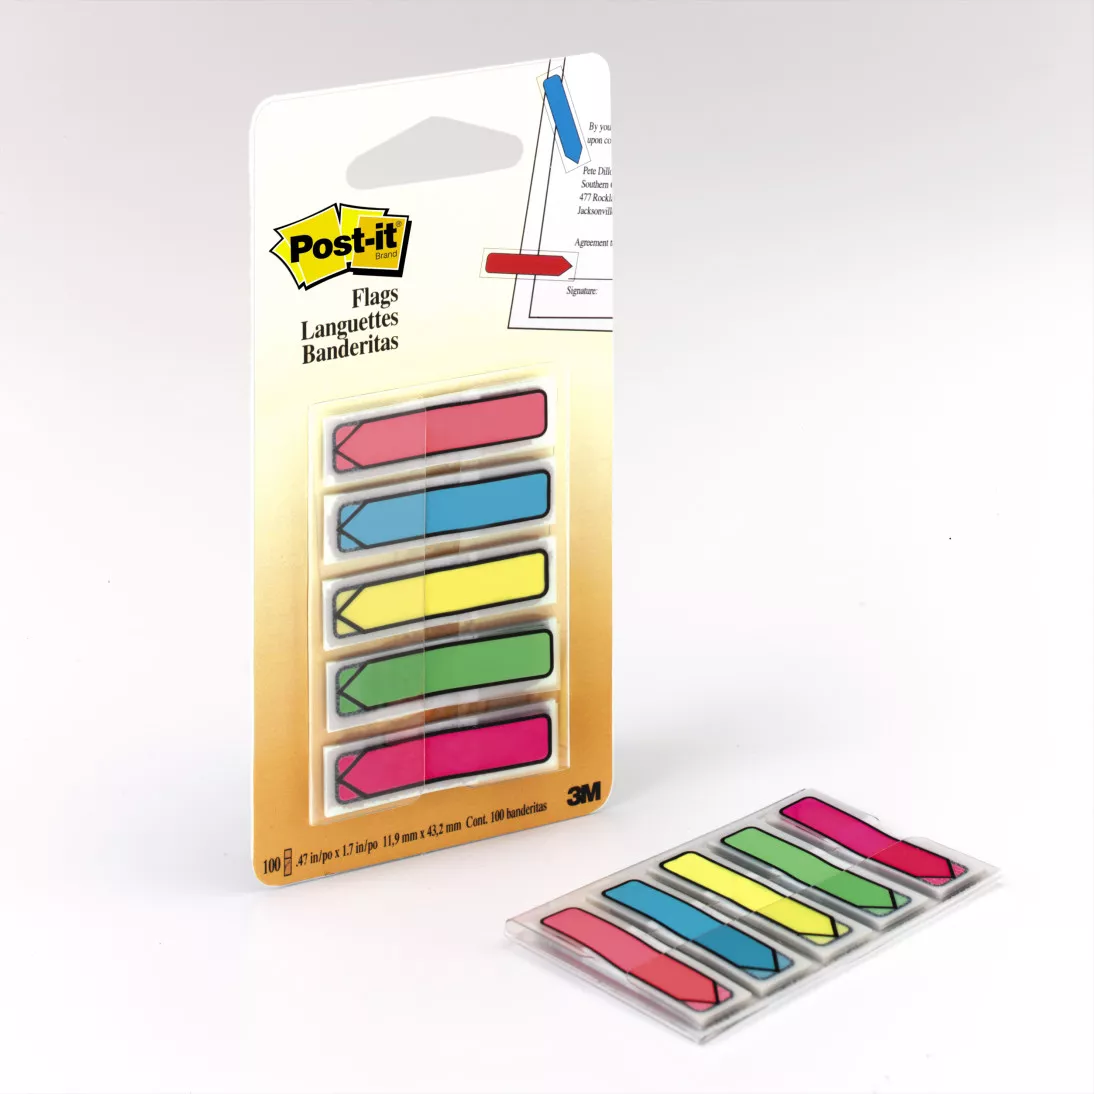 Post-it® Flags 684-ARR2, .47 in. x 1.7 in. Assorted Brights 20 each 100 TTL Flags